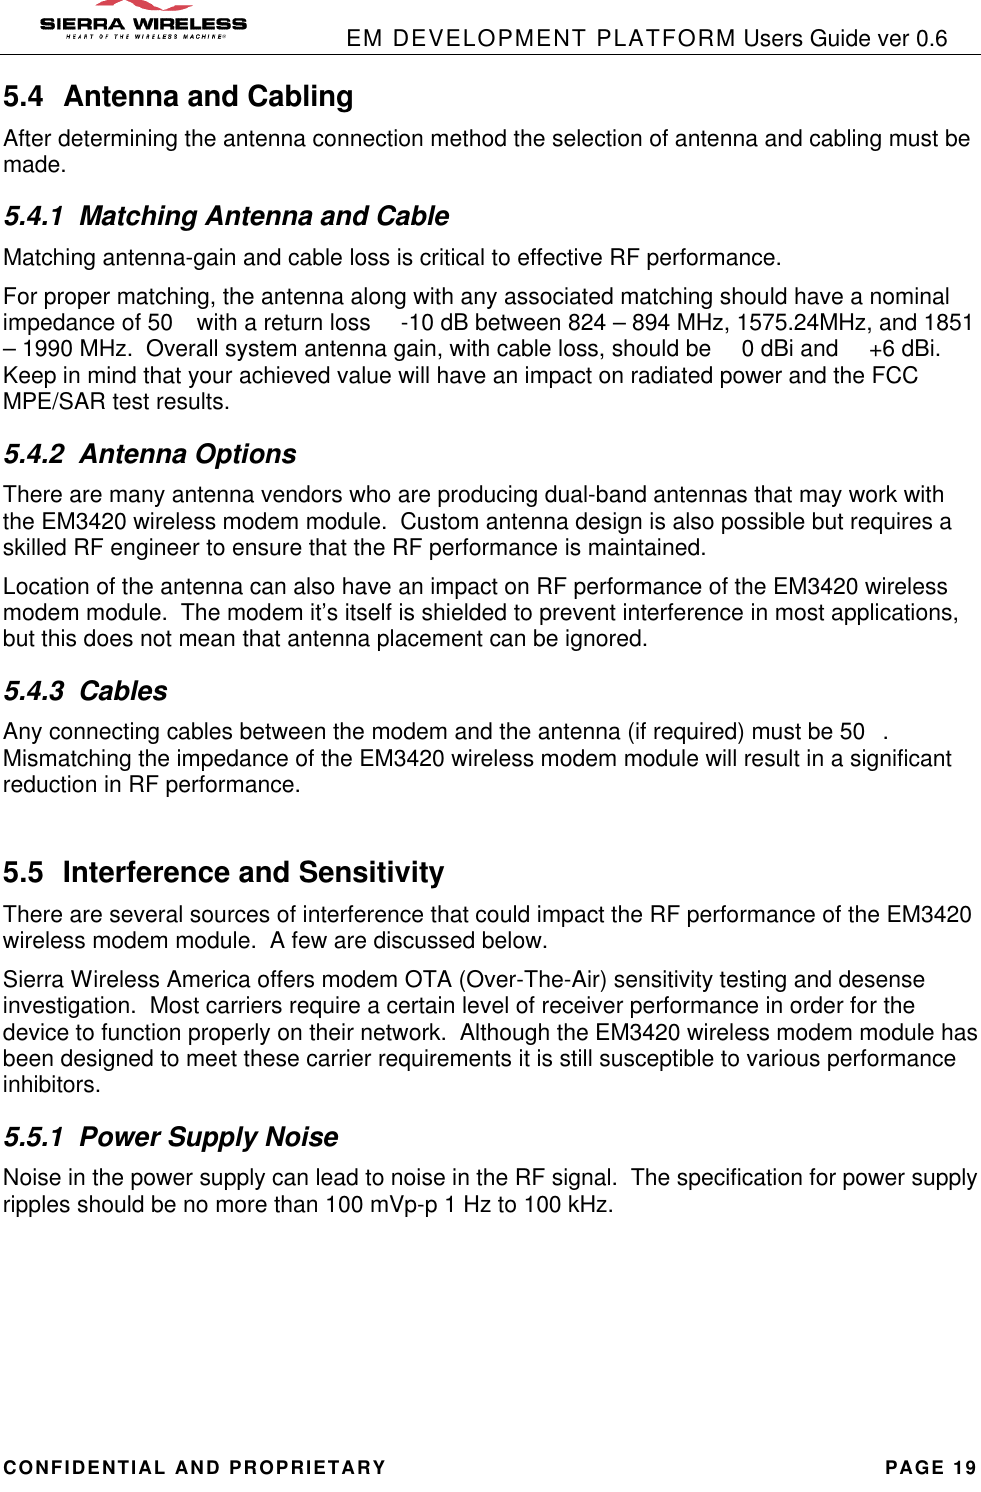            EM DEVELOPMENT PLATFORM Users Guide ver 0.6 CONFIDENTIAL AND PROPRIETARY PAGE 19 5.4 Antenna and Cabling After determining the antenna connection method the selection of antenna and cabling must be made. 5.4.1 Matching Antenna and Cable Matching antenna-gain and cable loss is critical to effective RF performance. For proper matching, the antenna along with any associated matching should have a nominal impedance of 50 with a return loss  -10 dB between 824 – 894 MHz, 1575.24MHz, and 1851 – 1990 MHz.  Overall system antenna gain, with cable loss, should be  0 dBi and  +6 dBi.  Keep in mind that your achieved value will have an impact on radiated power and the FCC MPE/SAR test results. 5.4.2 Antenna Options There are many antenna vendors who are producing dual-band antennas that may work with the EM3420 wireless modem module.  Custom antenna design is also possible but requires a skilled RF engineer to ensure that the RF performance is maintained. Location of the antenna can also have an impact on RF performance of the EM3420 wireless modem module.  The modem it’s itself is shielded to prevent interference in most applications, but this does not mean that antenna placement can be ignored.   5.4.3 Cables Any connecting cables between the modem and the antenna (if required) must be 50.  Mismatching the impedance of the EM3420 wireless modem module will result in a significant reduction in RF performance.  5.5 Interference and Sensitivity There are several sources of interference that could impact the RF performance of the EM3420 wireless modem module.  A few are discussed below.   Sierra Wireless America offers modem OTA (Over-The-Air) sensitivity testing and desense investigation.  Most carriers require a certain level of receiver performance in order for the device to function properly on their network.  Although the EM3420 wireless modem module has been designed to meet these carrier requirements it is still susceptible to various performance inhibitors. 5.5.1 Power Supply Noise Noise in the power supply can lead to noise in the RF signal.  The specification for power supply ripples should be no more than 100 mVp-p 1 Hz to 100 kHz.      